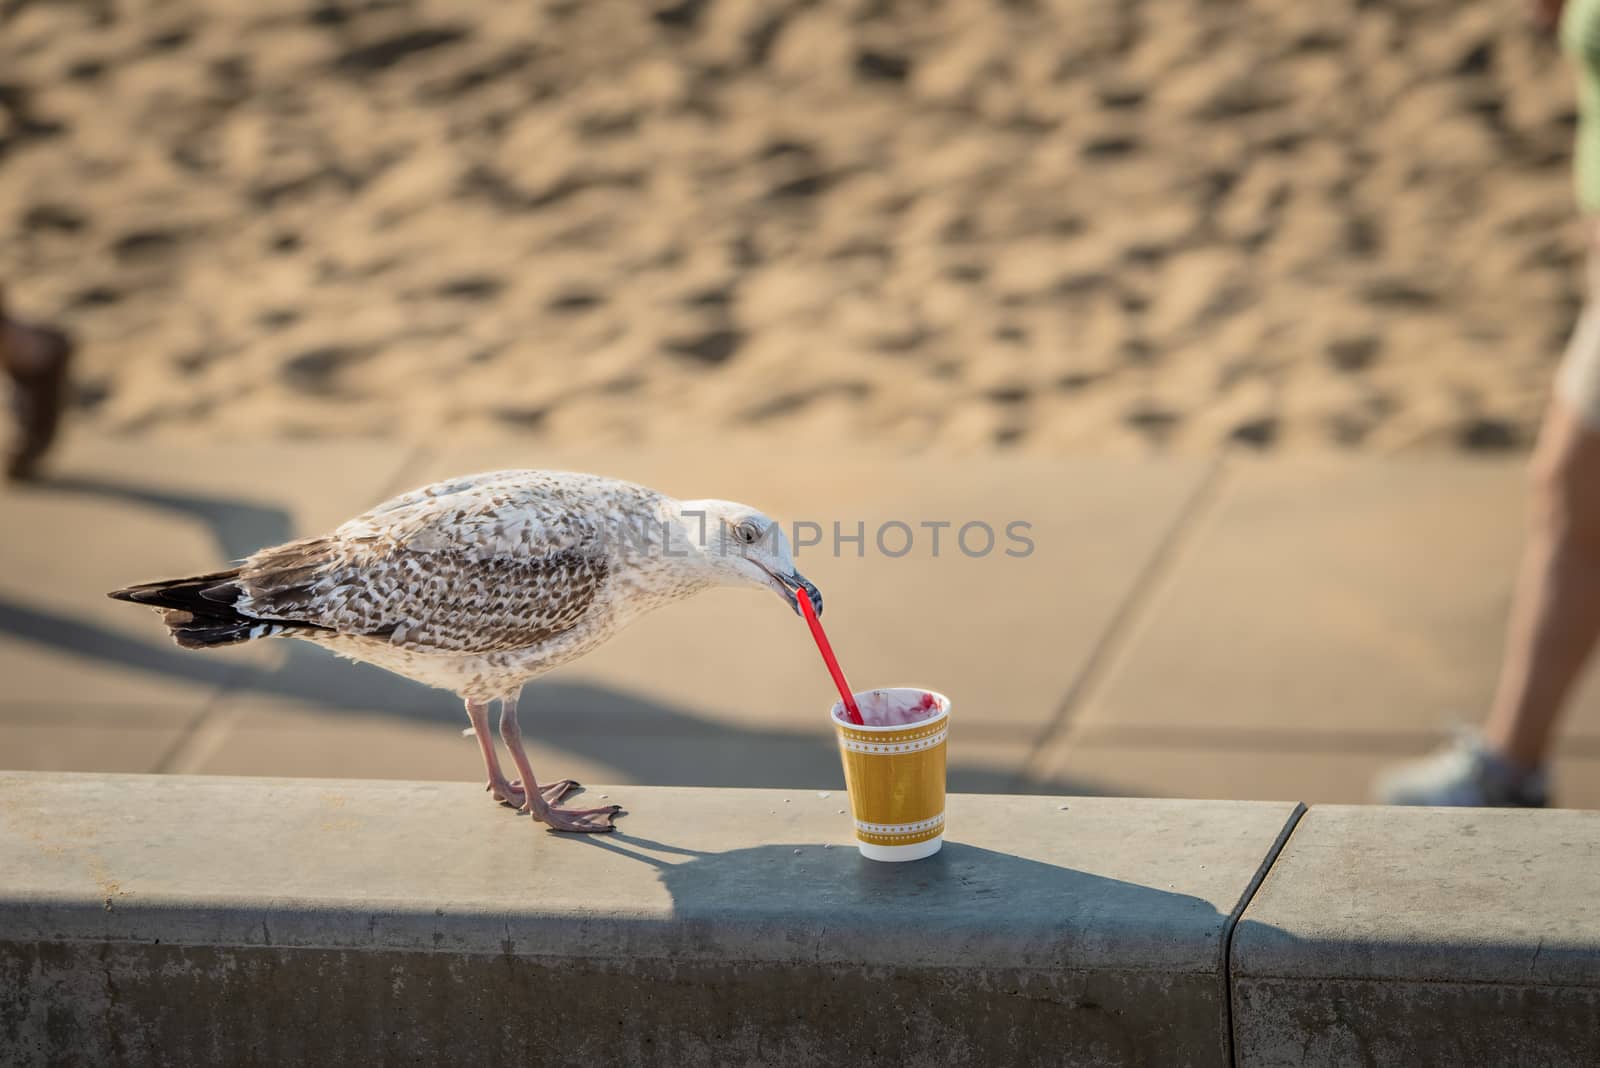 Seagull grabbing a plastic spoon and eating food from a cup left on the beach.